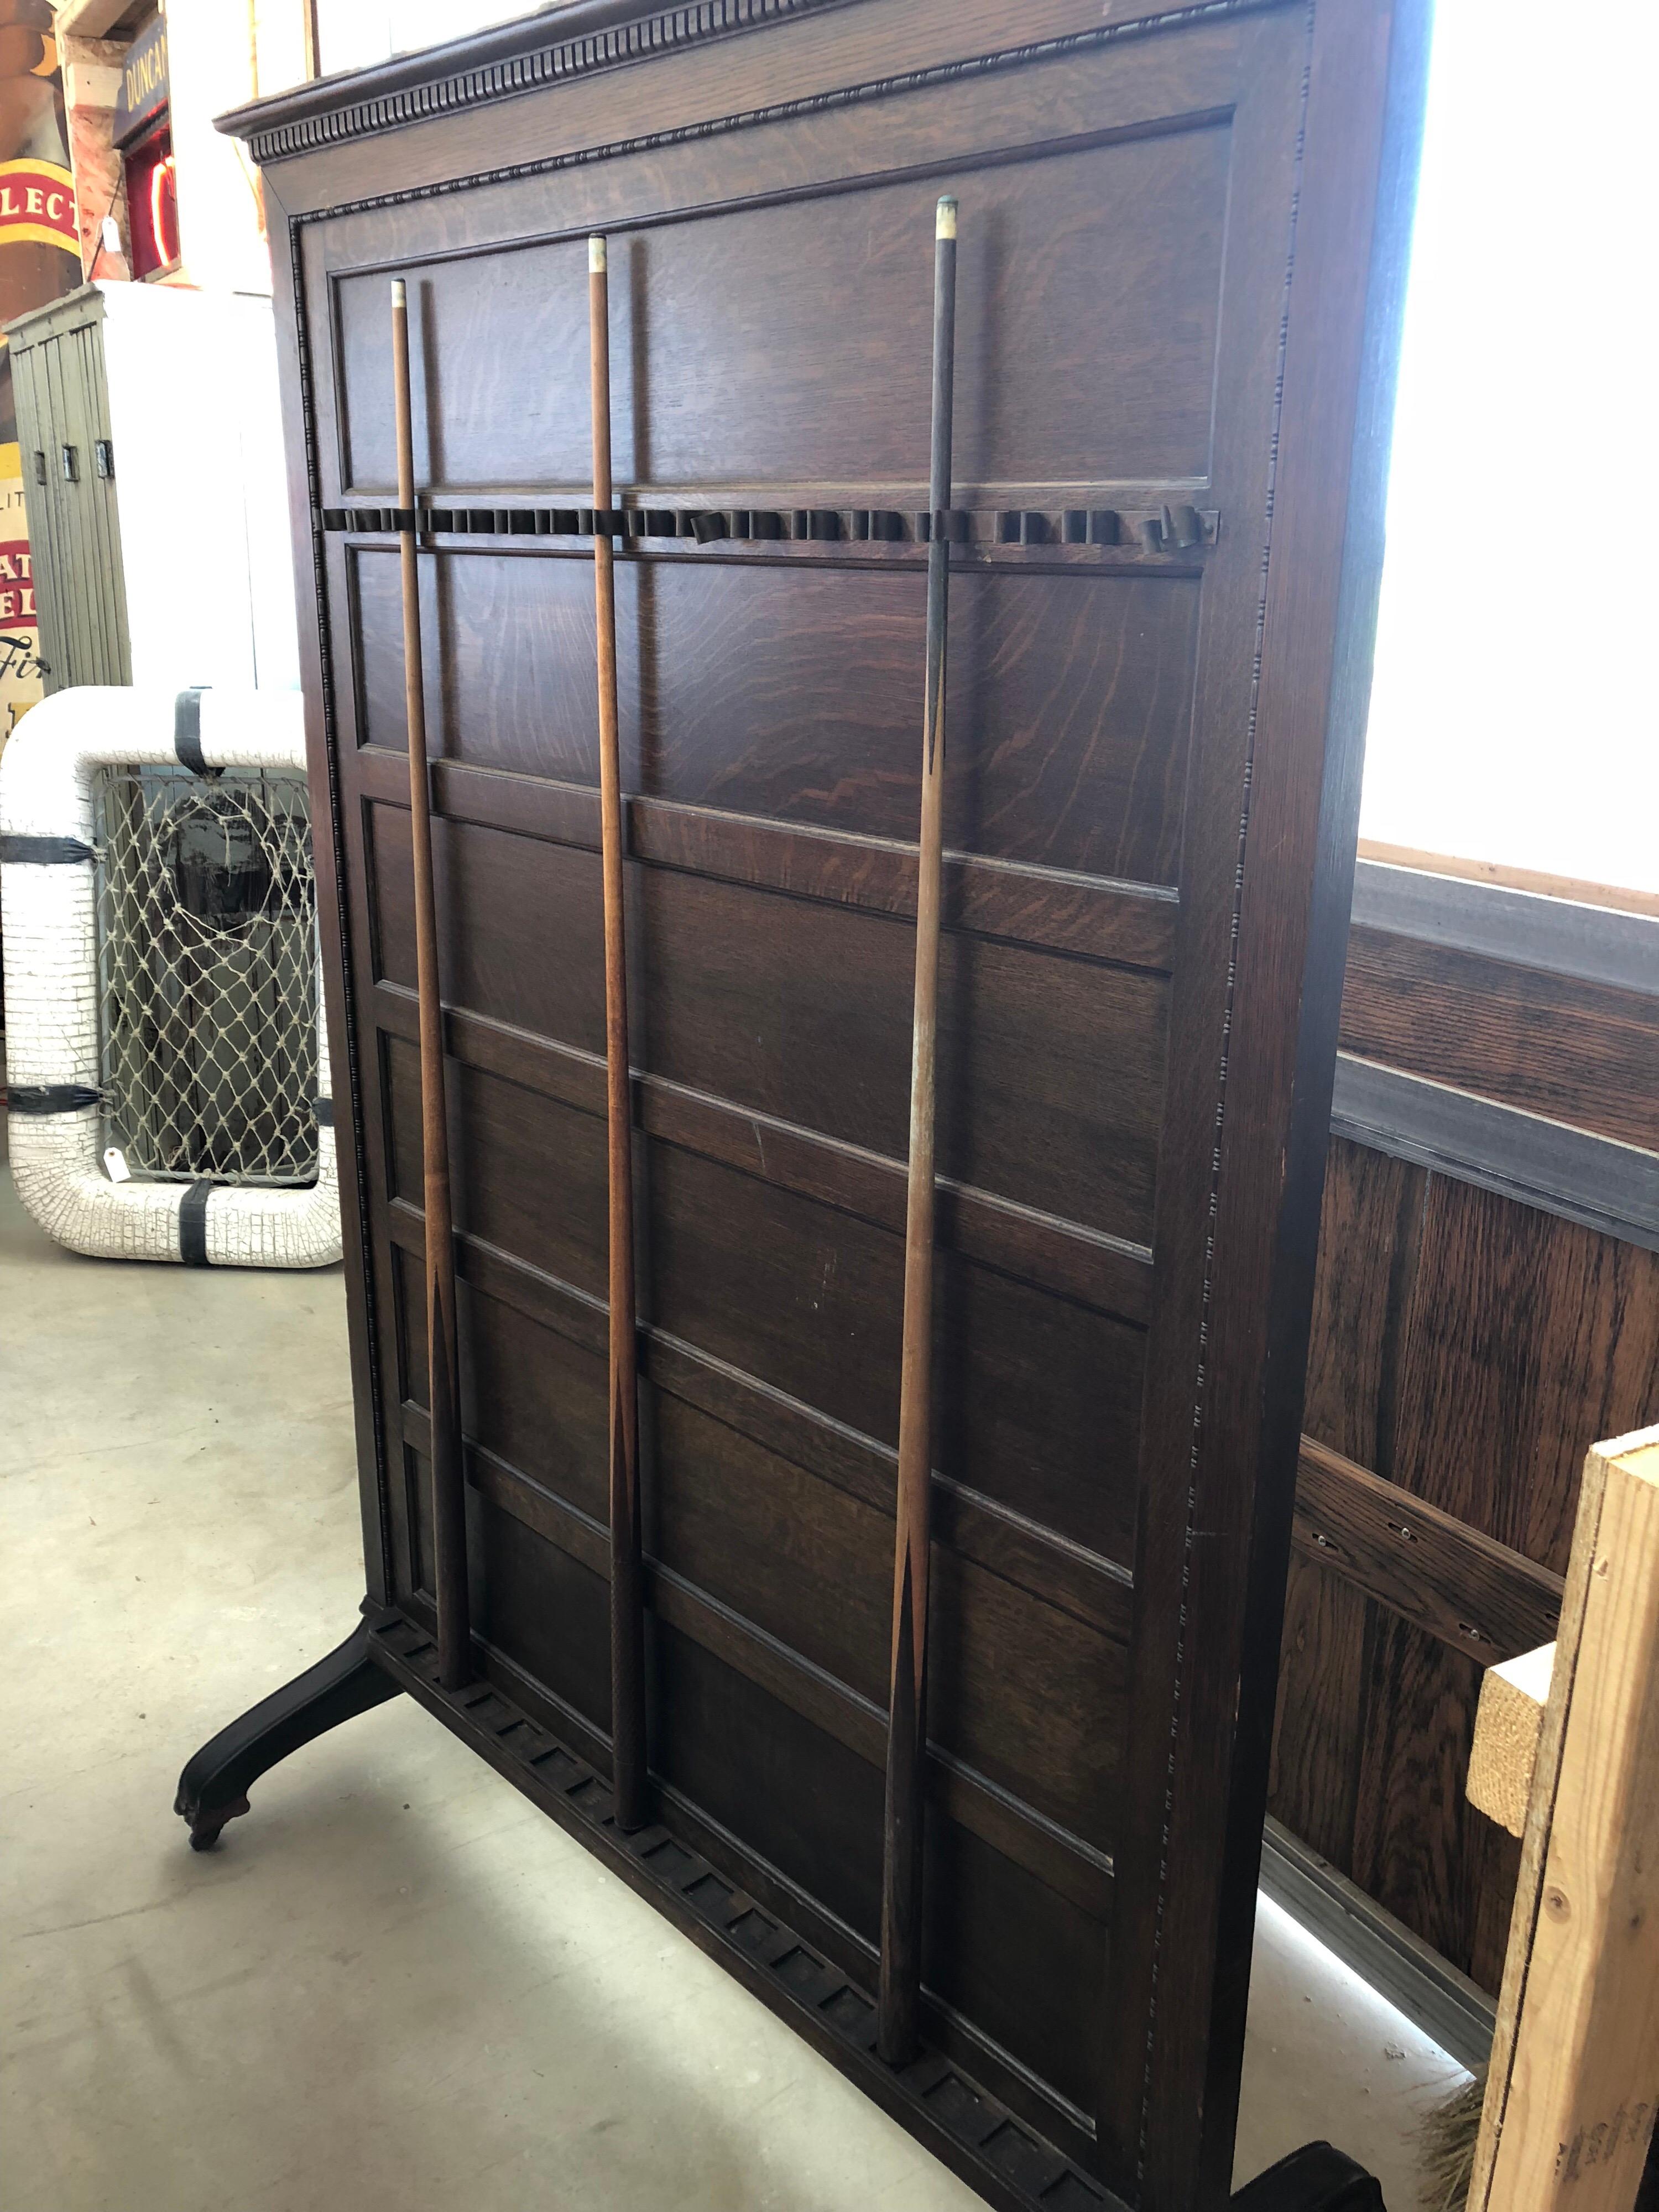 Antique Brunswick freestanding billiard rack. One side is cue rack and other has shelf for drinks.